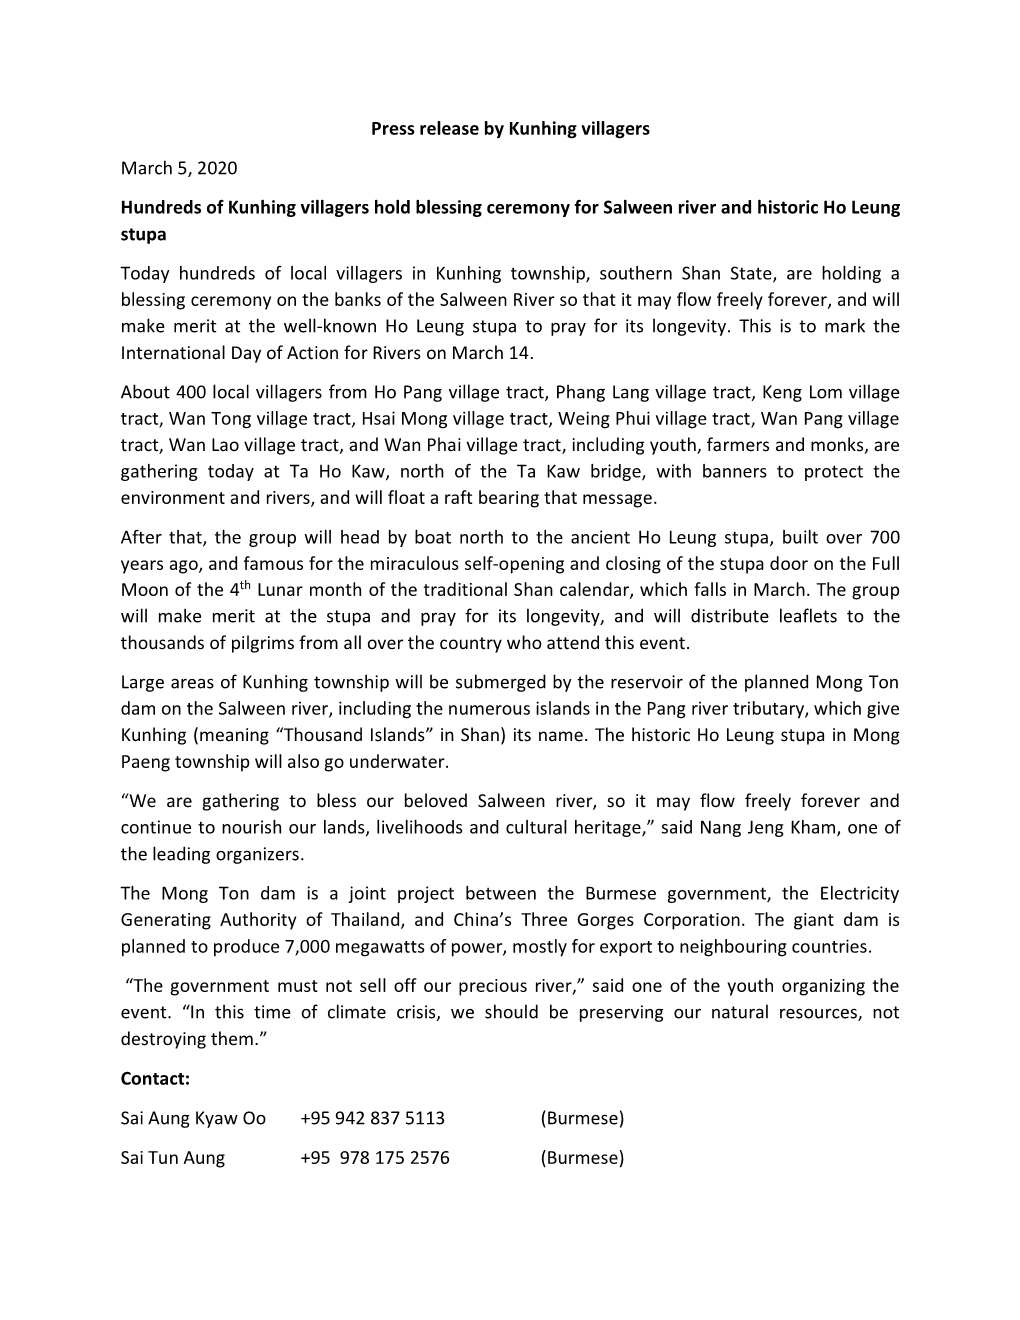 Press Release by Kunhing Villagers March 5, 2020 Hundreds Of